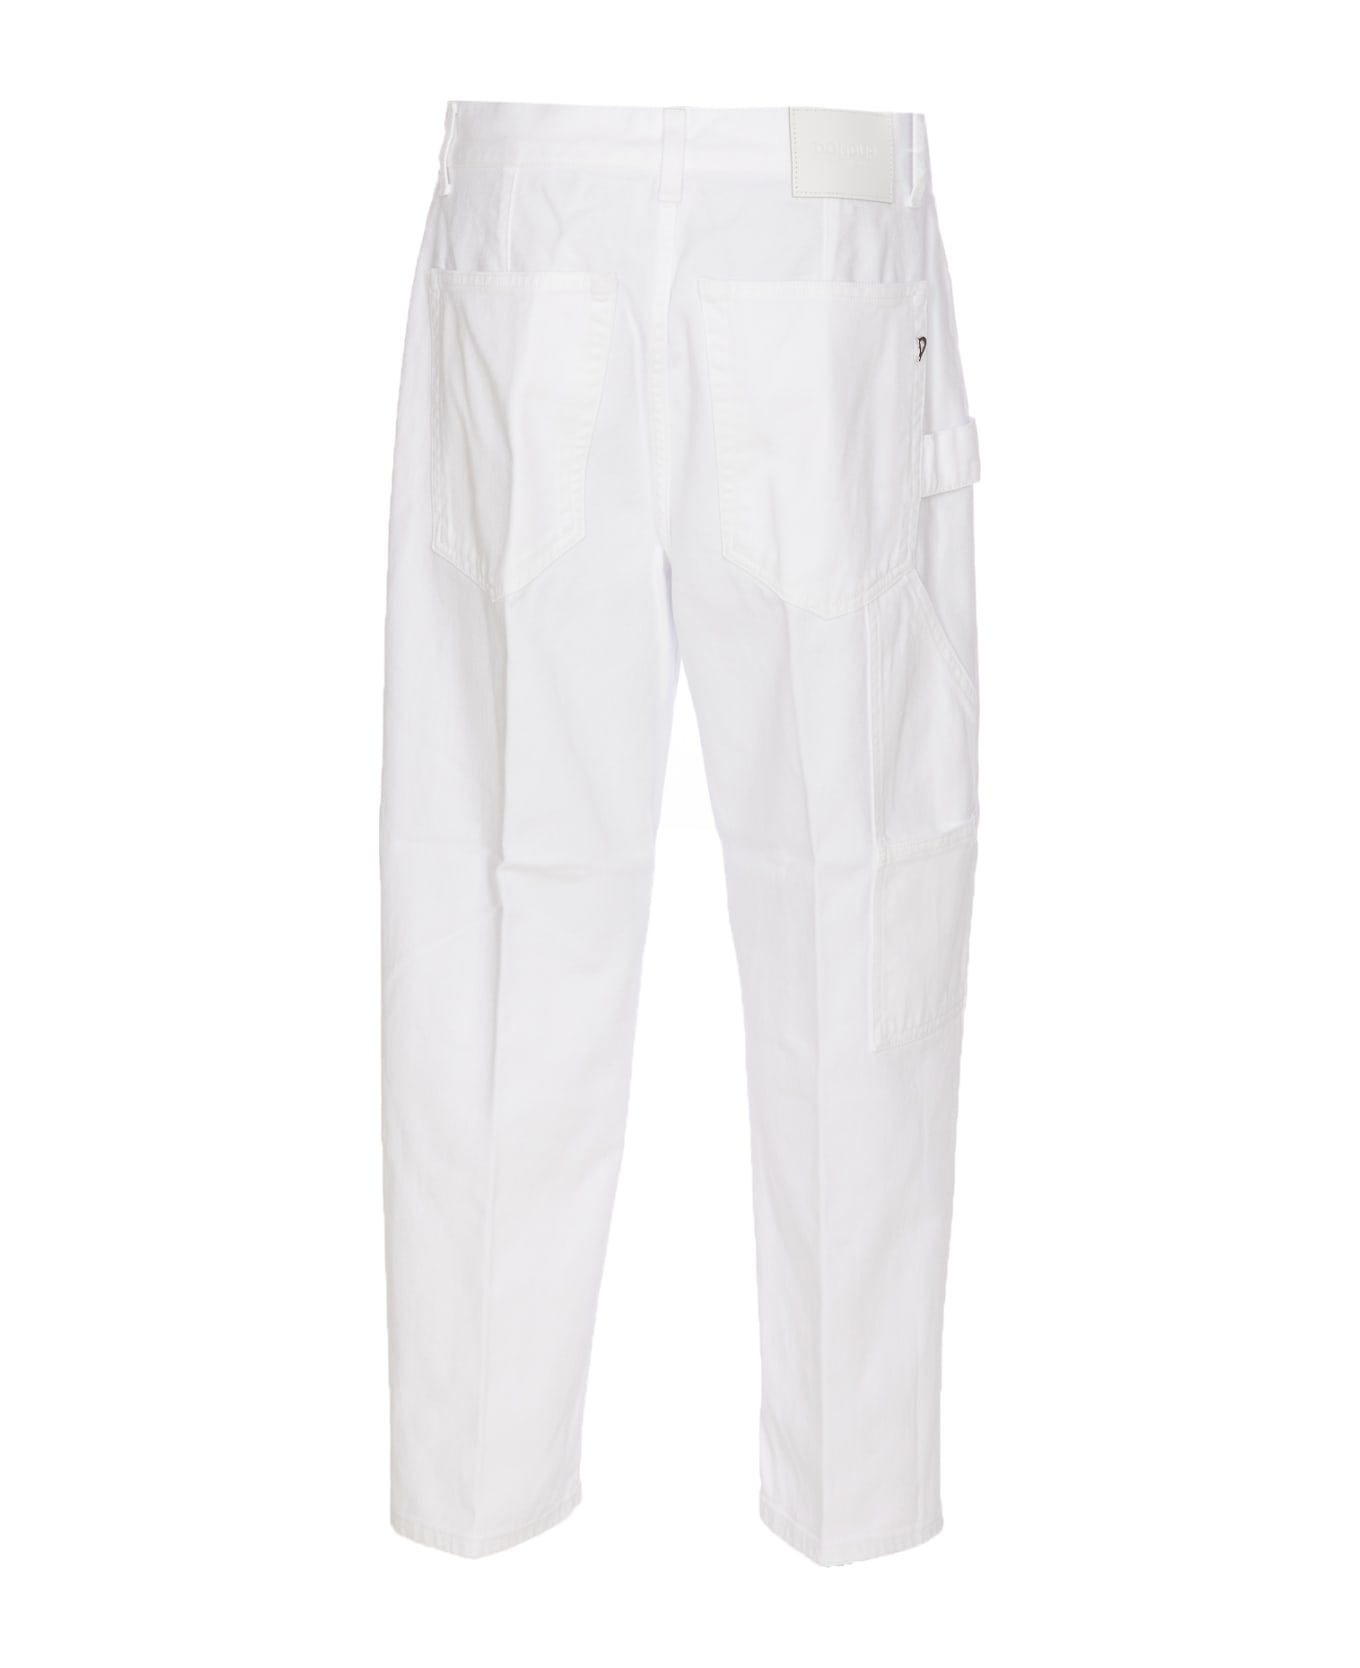 Dondup Carrie Denim Jeans - White ボトムス